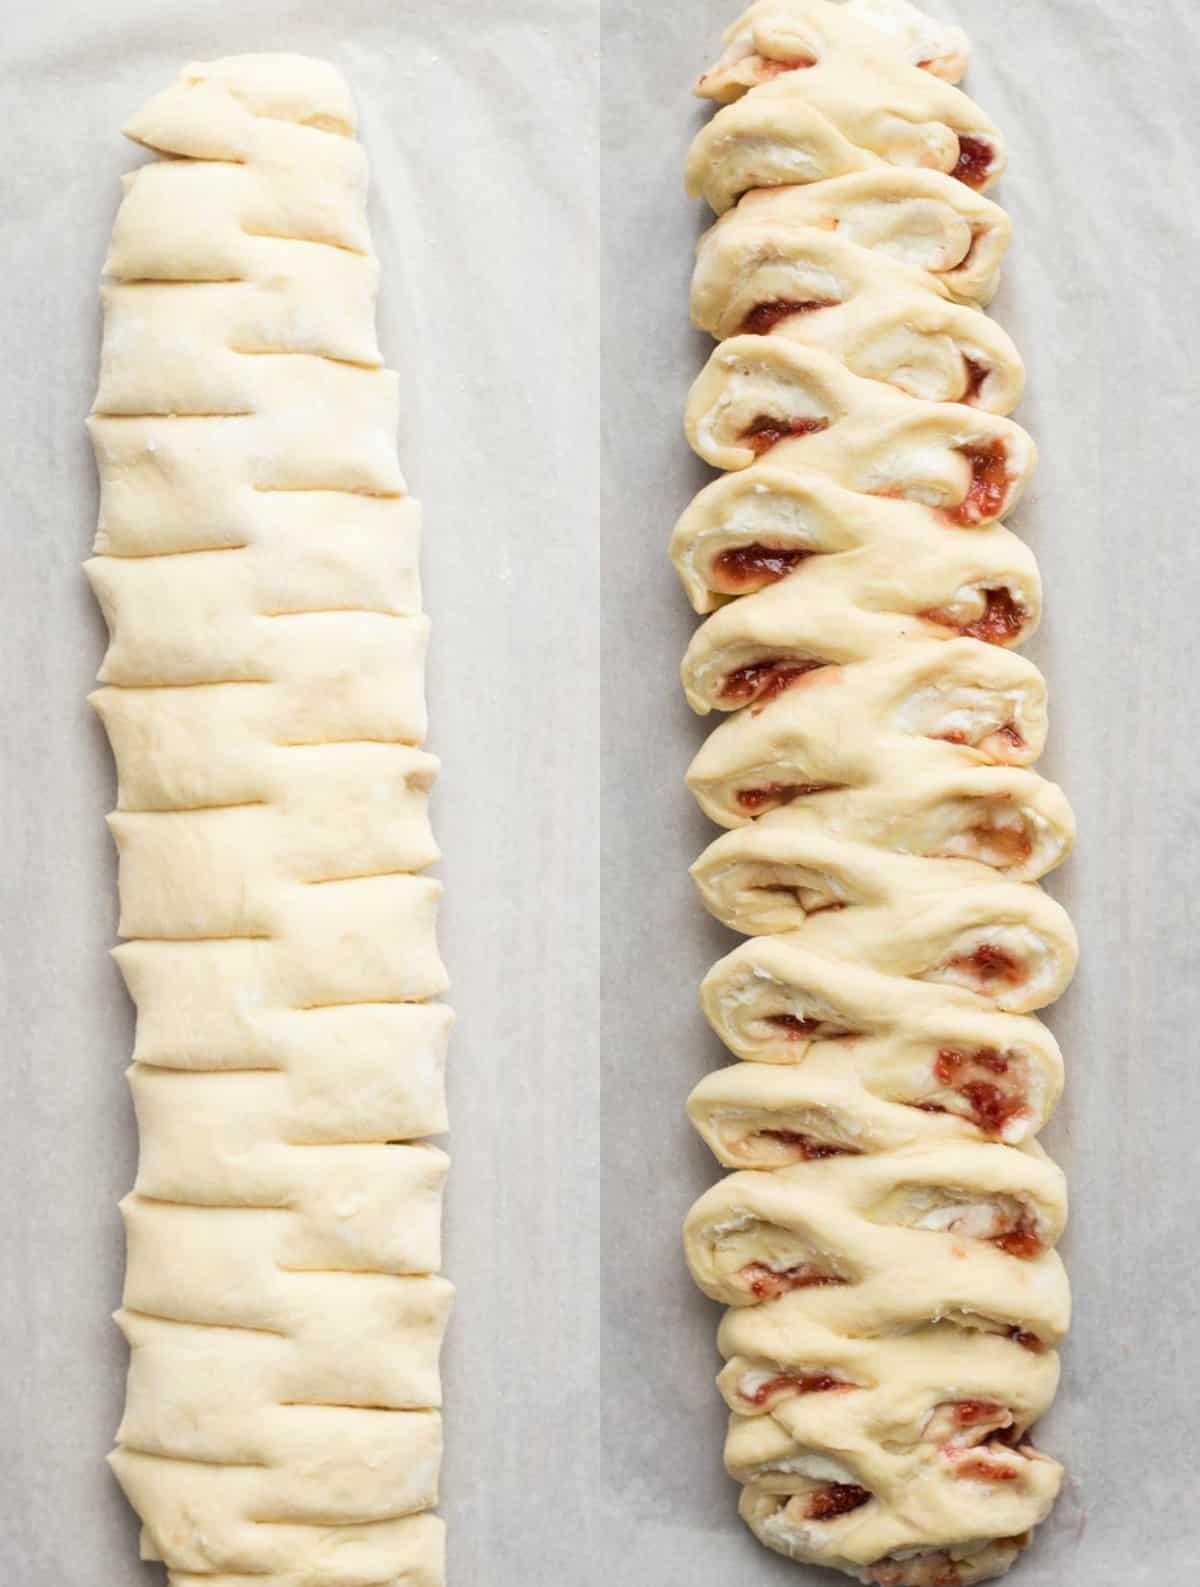 How to form this sweet bread recipe, cutting and arranging the bread with jam and cream cheese.